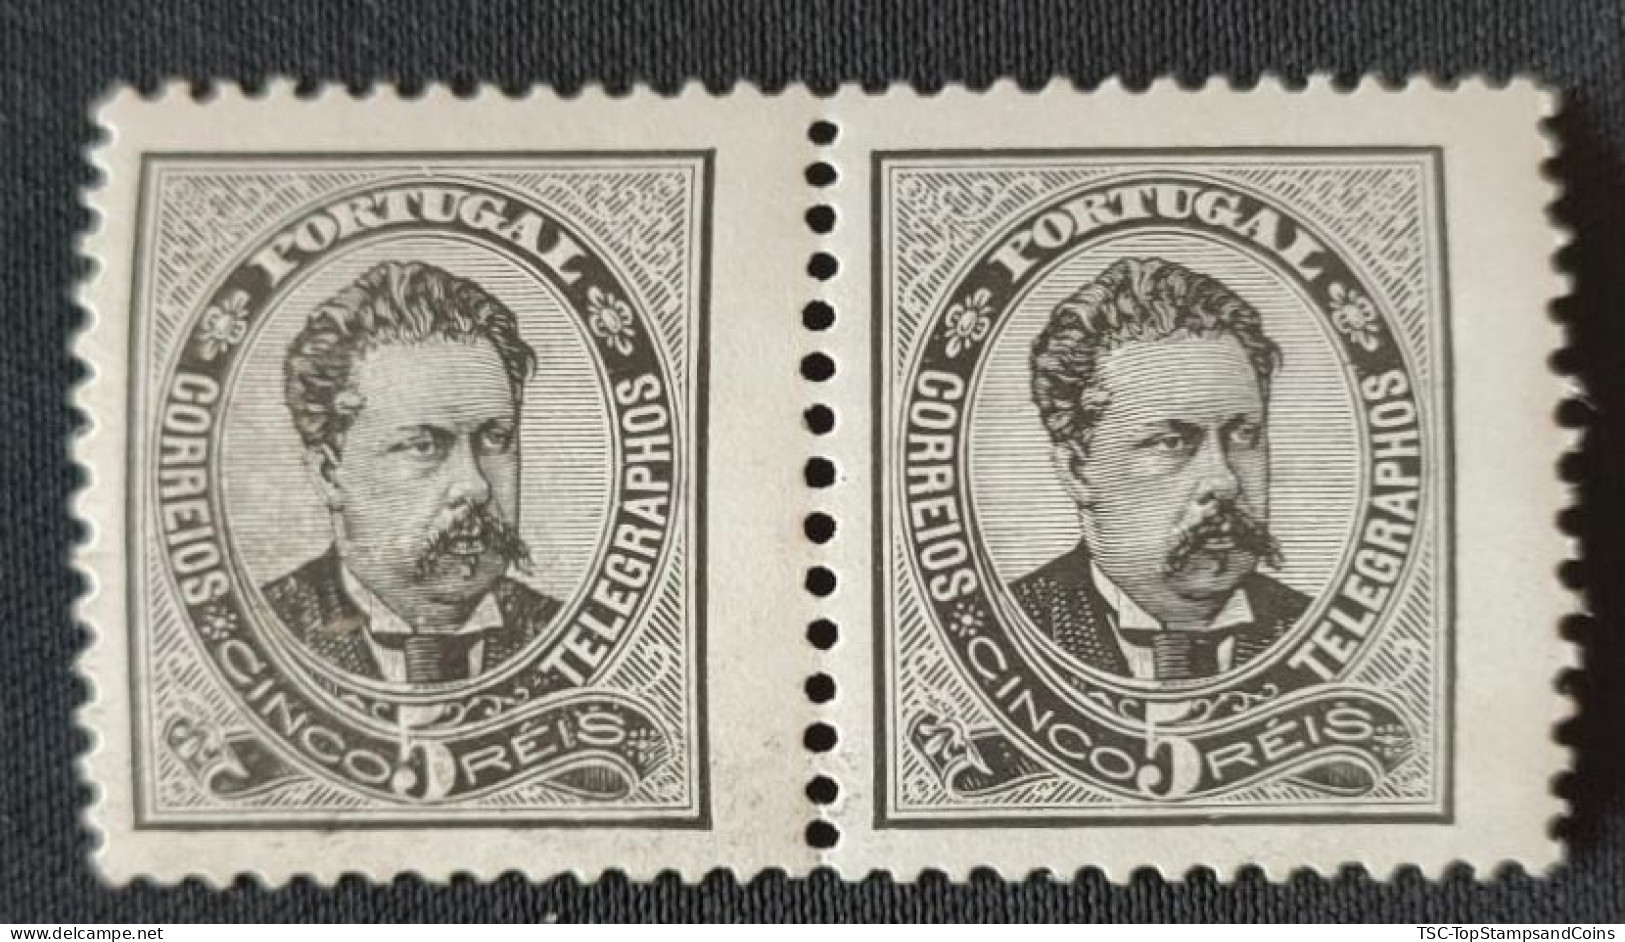 POR0060cMNHx2h3 - King D. Luís I Frontal View - New Values - Pair Of 5 Reis MNH Stamps - Portugal - 1887 - Unused Stamps